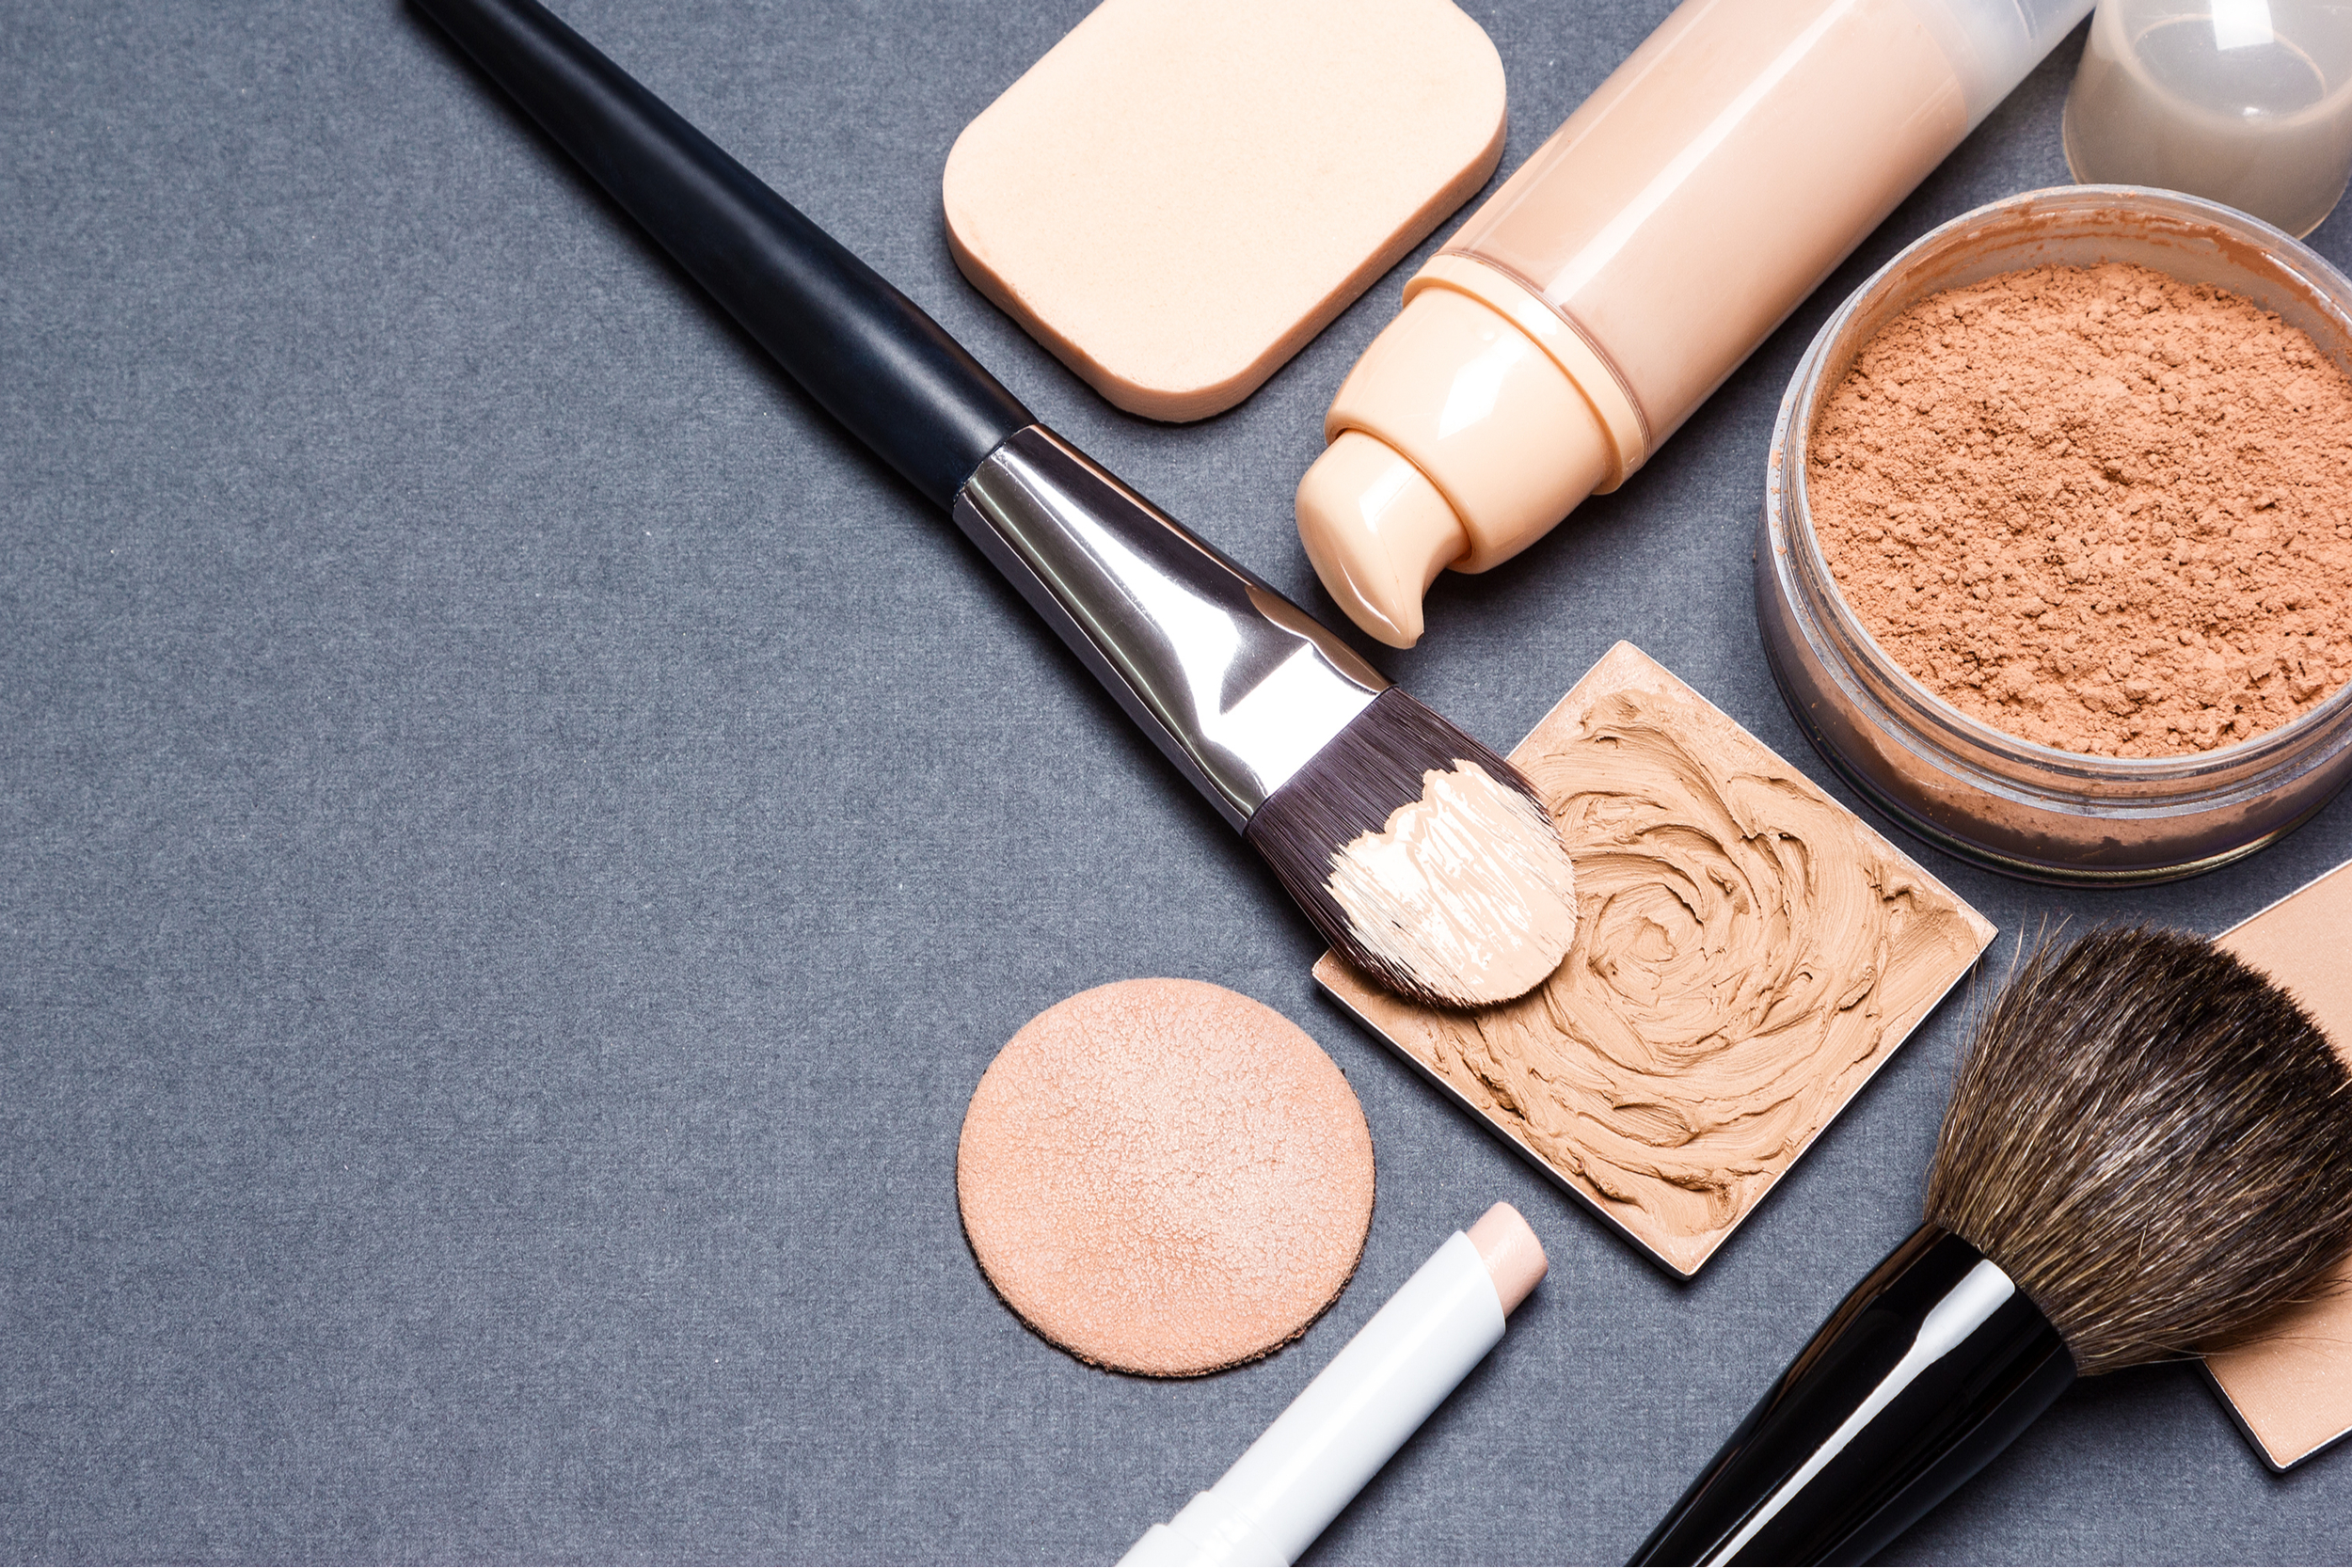 The Best Foundation At Ulta For Every Skin Type